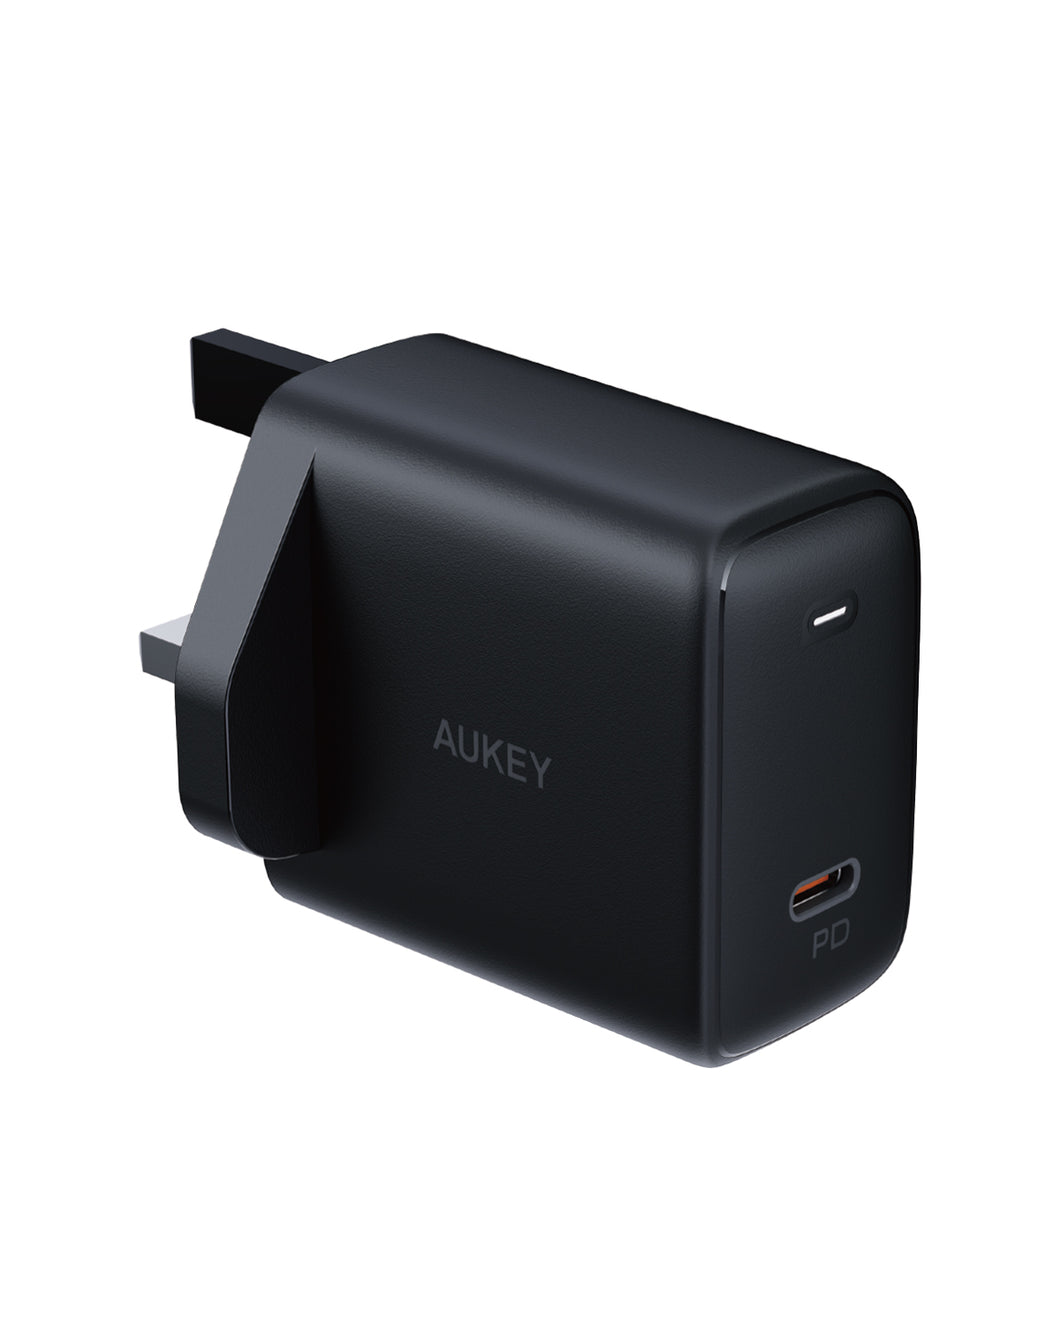 Aukey PA-F4 Swift 45W PD Wall Charger with GaN Power Tech - Supports Samsung Super Fast Charging 2.0